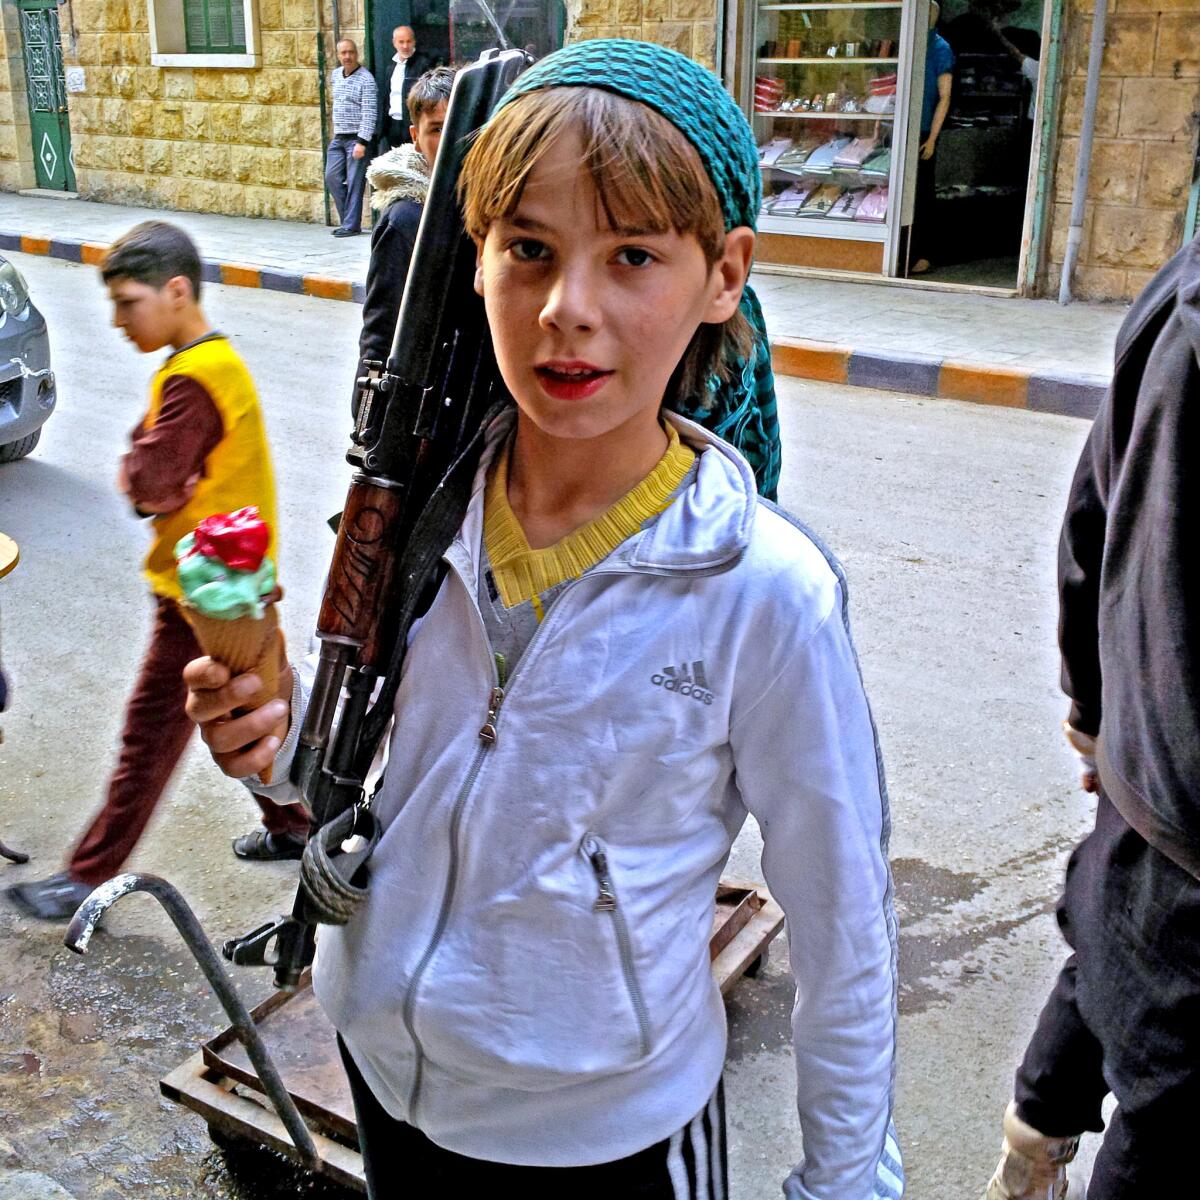 An armed boy in Aleppo, Syria, says he is a fighter with the Suqoor al Sham rebel group. He claimed to have been born in 1989, making him 24 or 25.